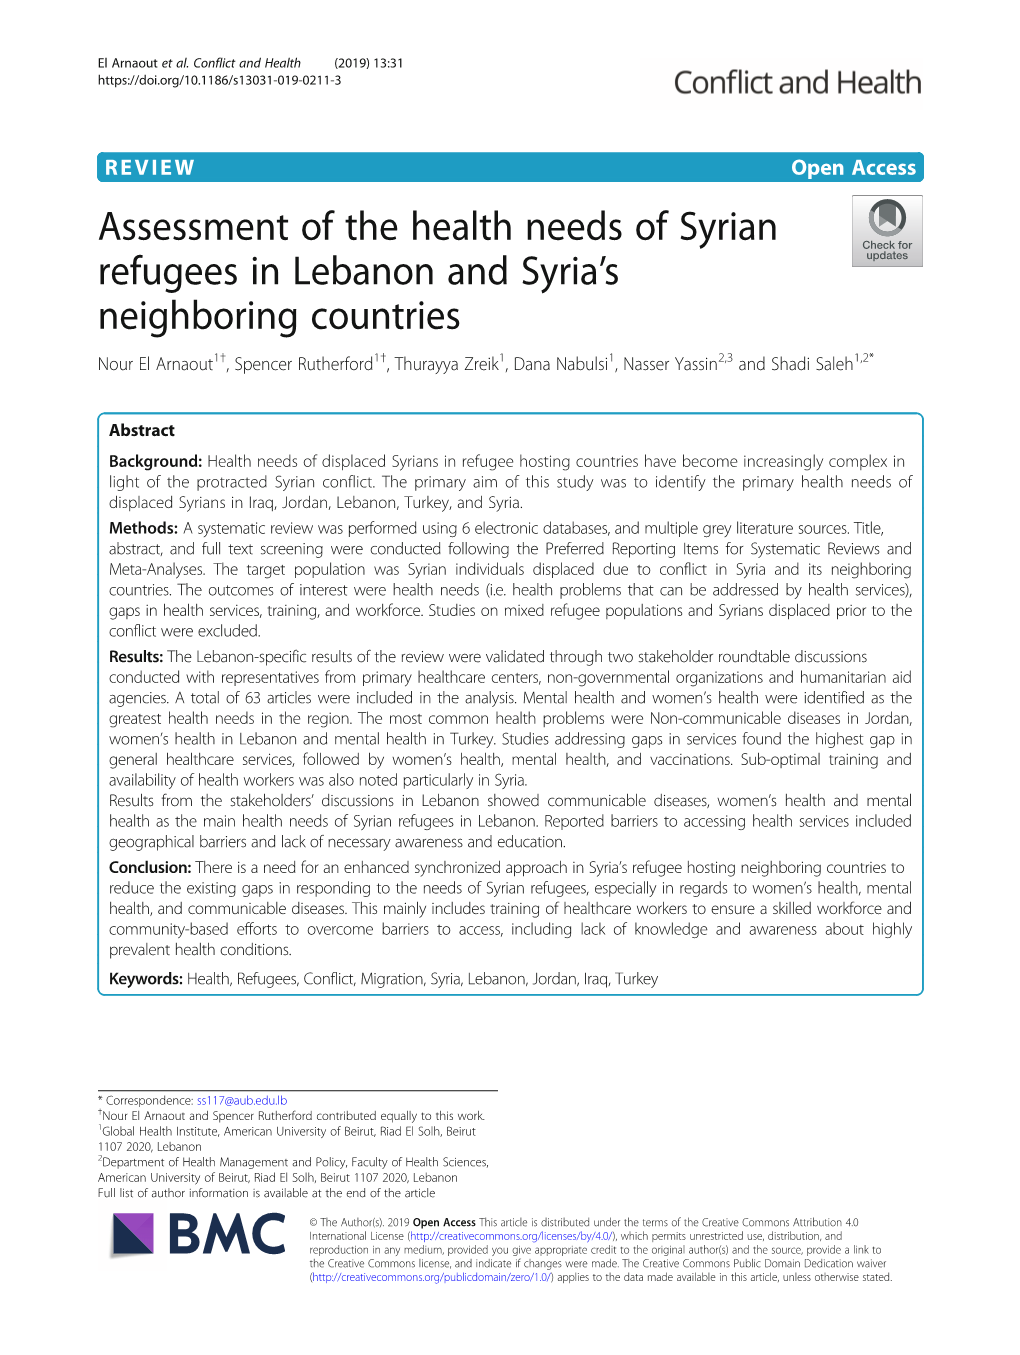 Assessment of the Health Needs of Syrian